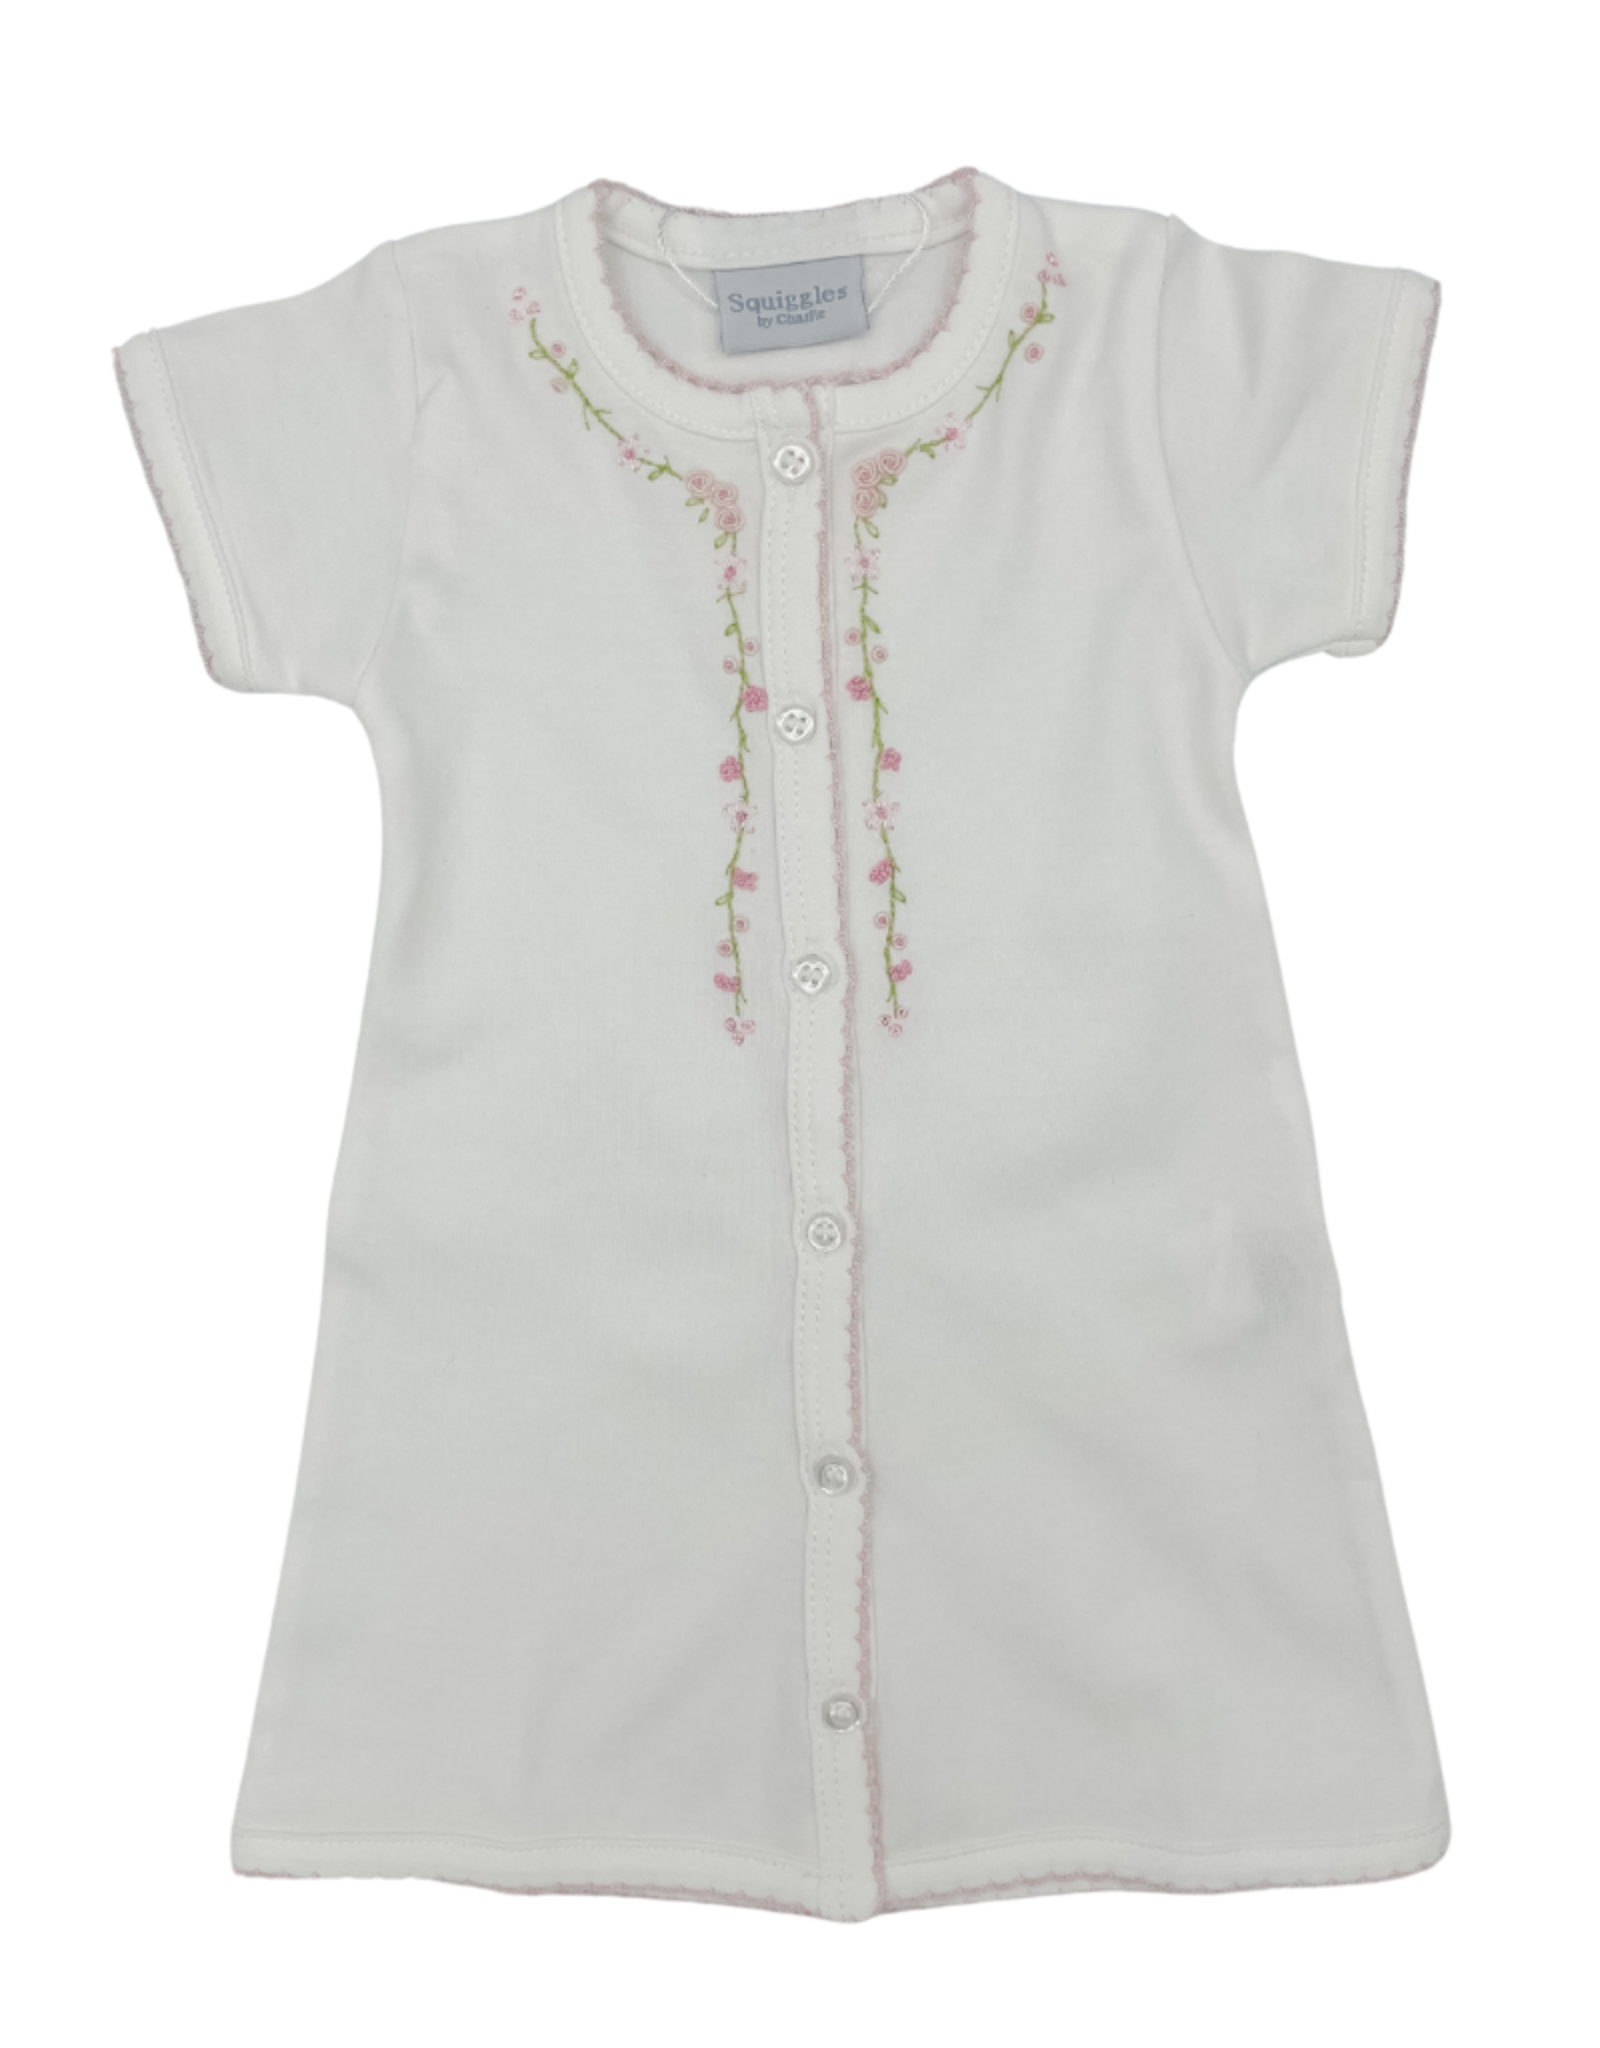 Squiggles Train Engine Daygown- White/ Light Blue trim